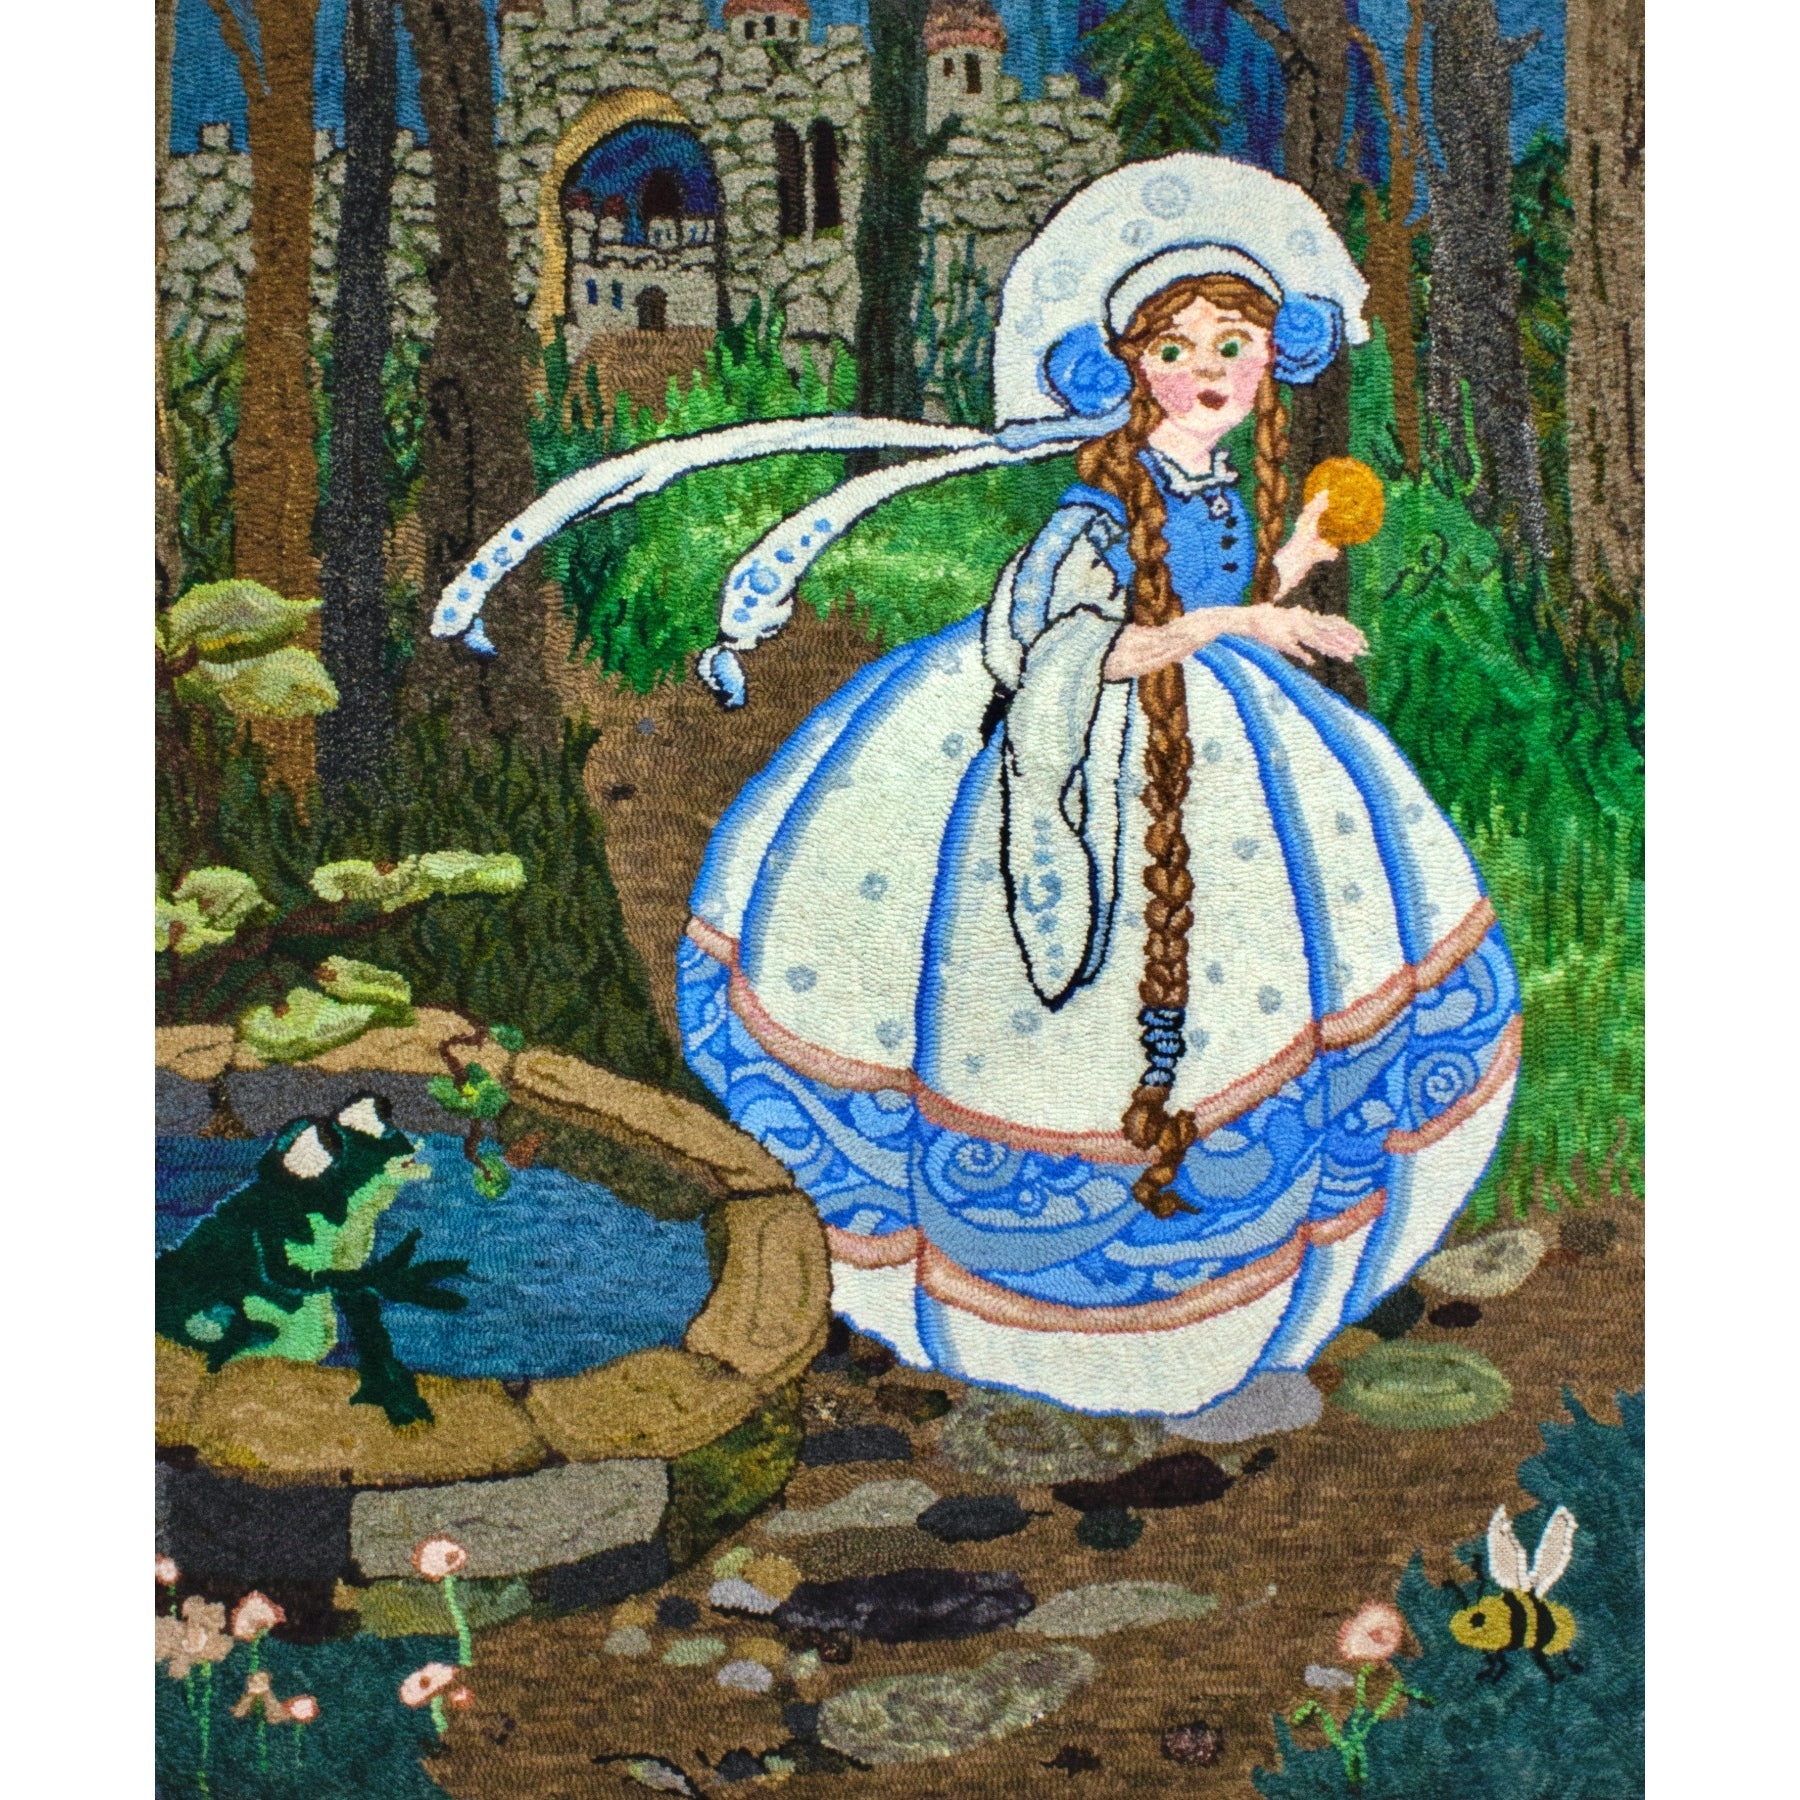 The Frog Prince, ill. Mabel Lucie Attwell, , rug hooked by Melissa Pattacini